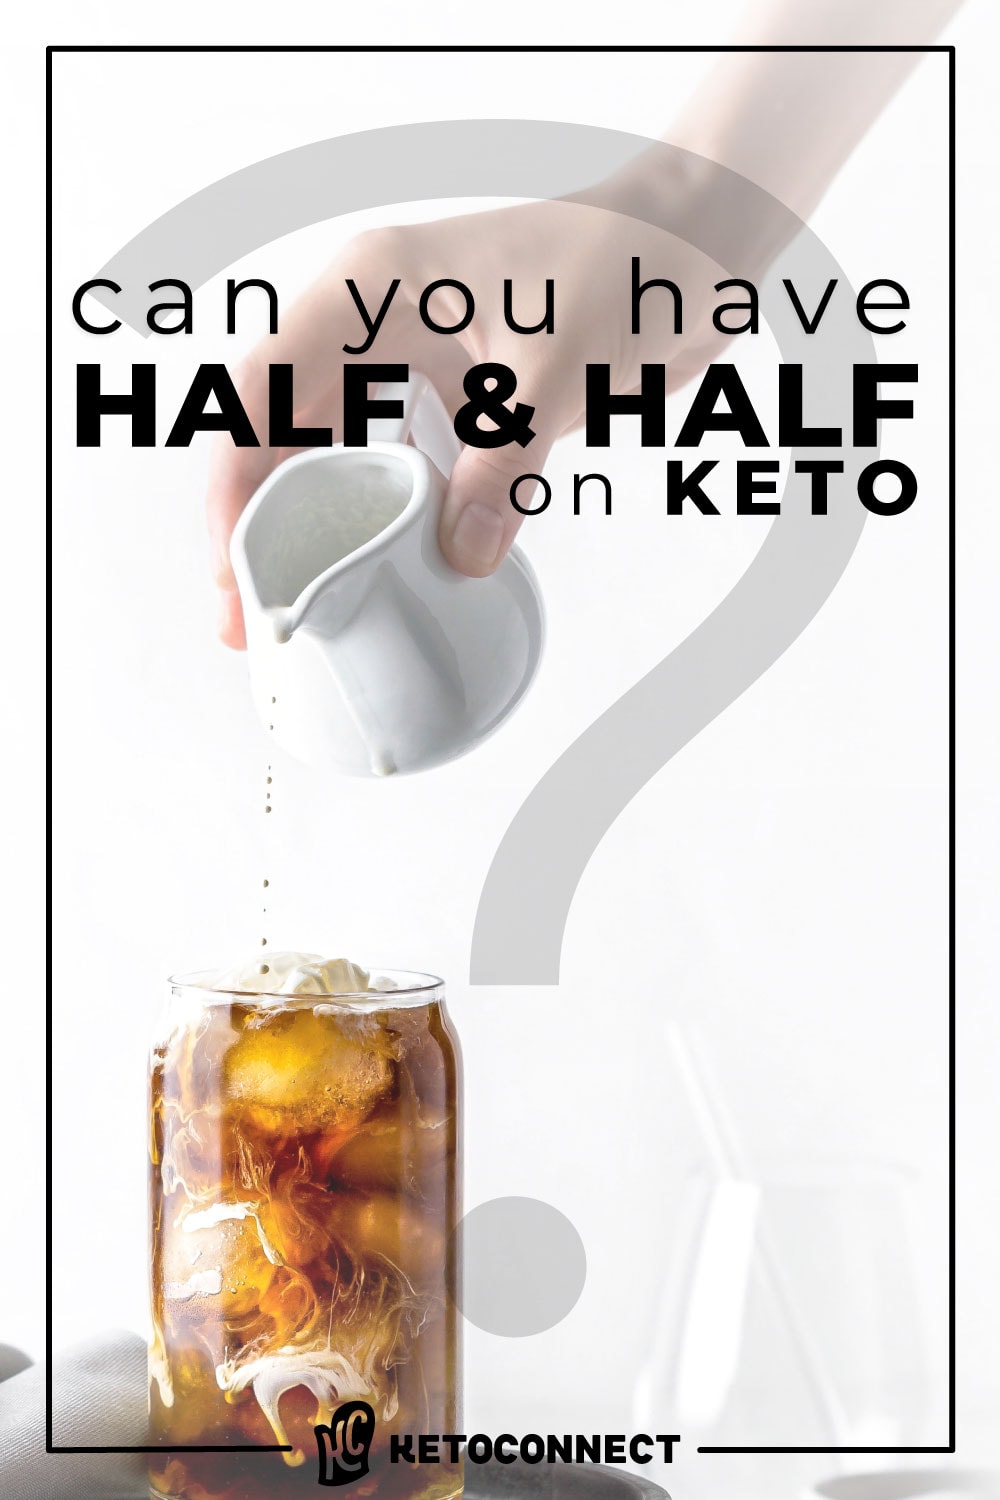 https://www.ketoconnect.net/wp-content/uploads/2021/10/can-you-have-half-and-half-on-keto.jpg